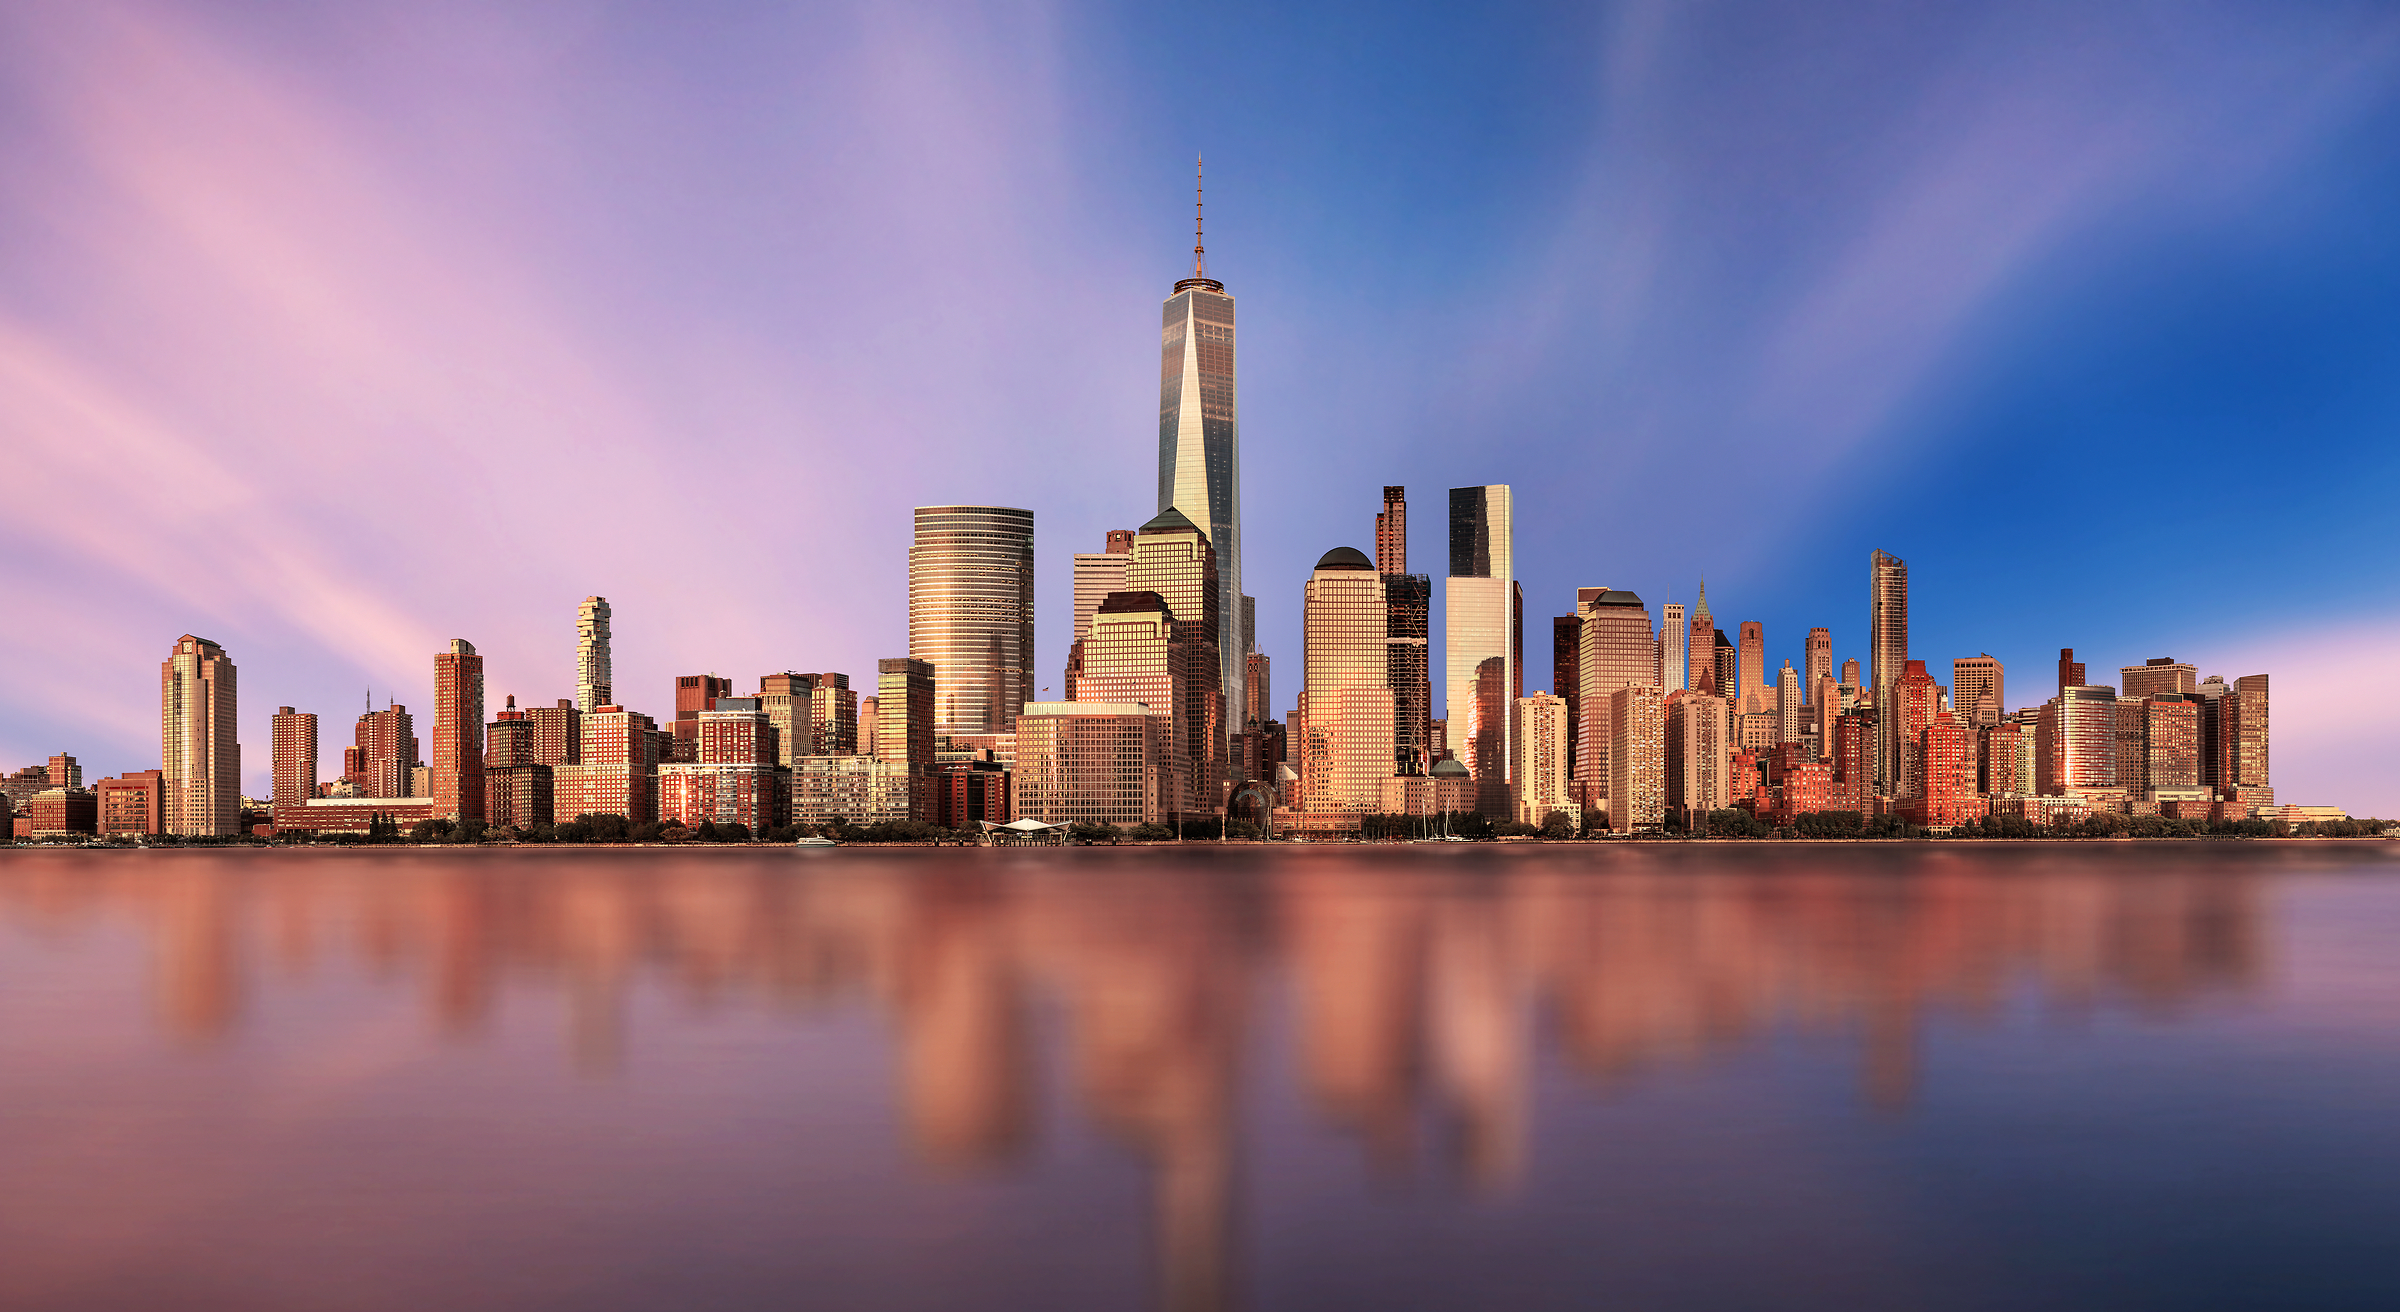 4,201 megapixels! An incredibly high resolution photo of a beautiful sunset, the NYC skyline, and the World Trade Center; cityscape fine art print created by Chris Collacott in Manhattan, New York City